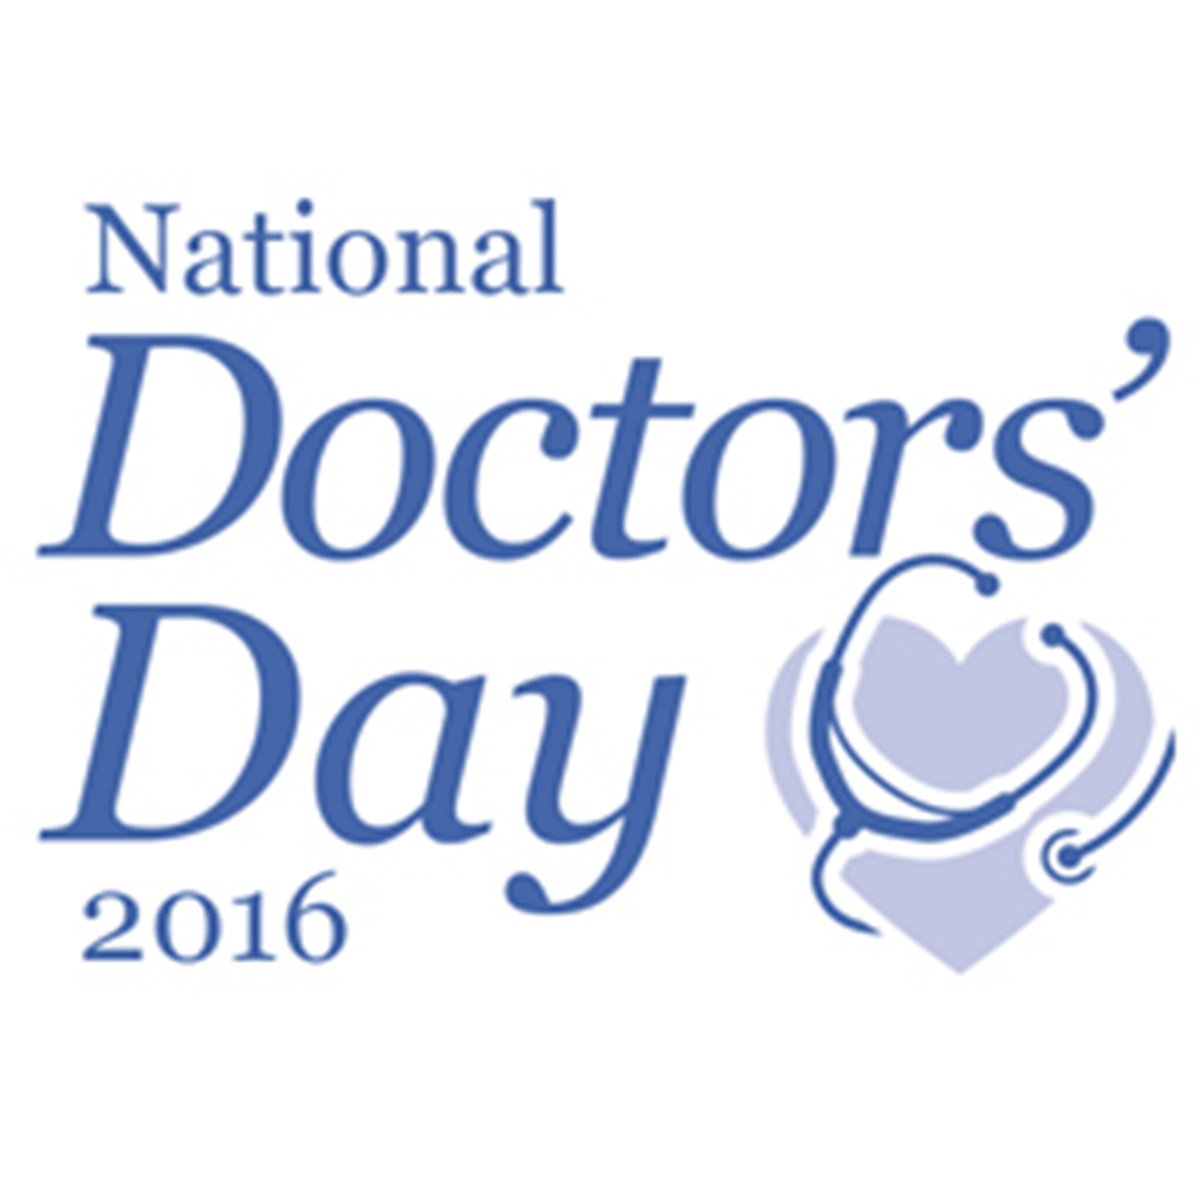 National Doctor's Day 2016